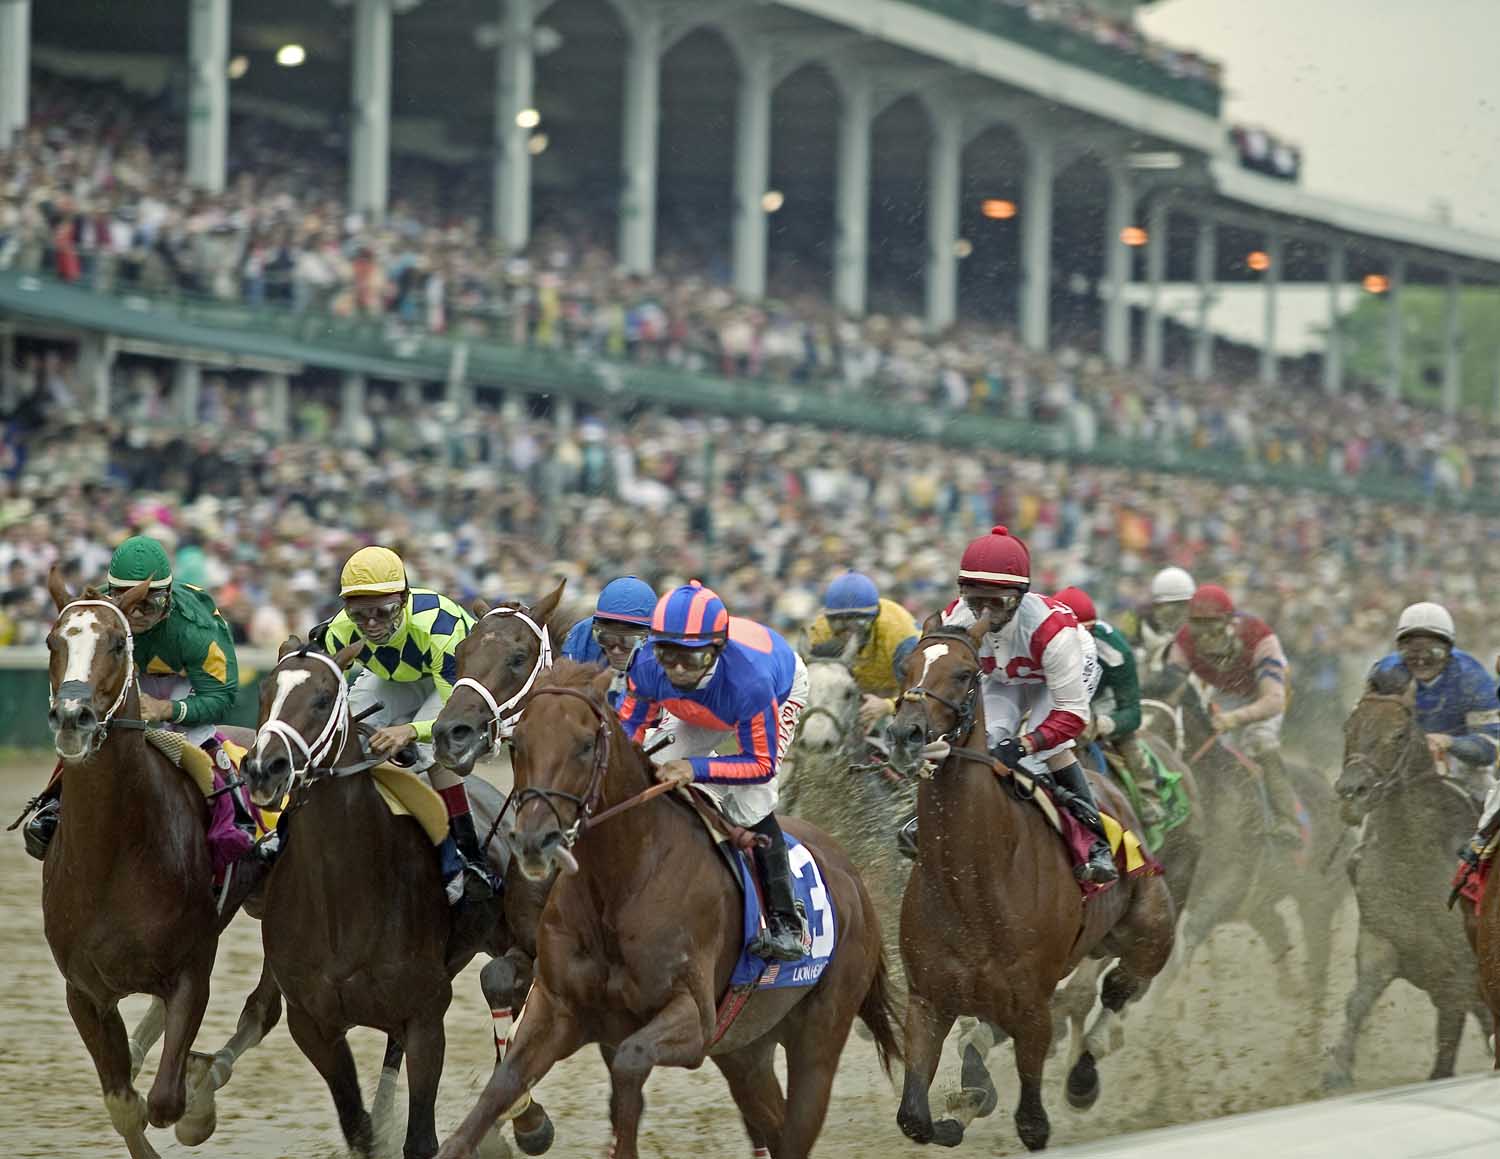 How to Buy Kentucky Derby Churchill Downs Tickets Online at Discount